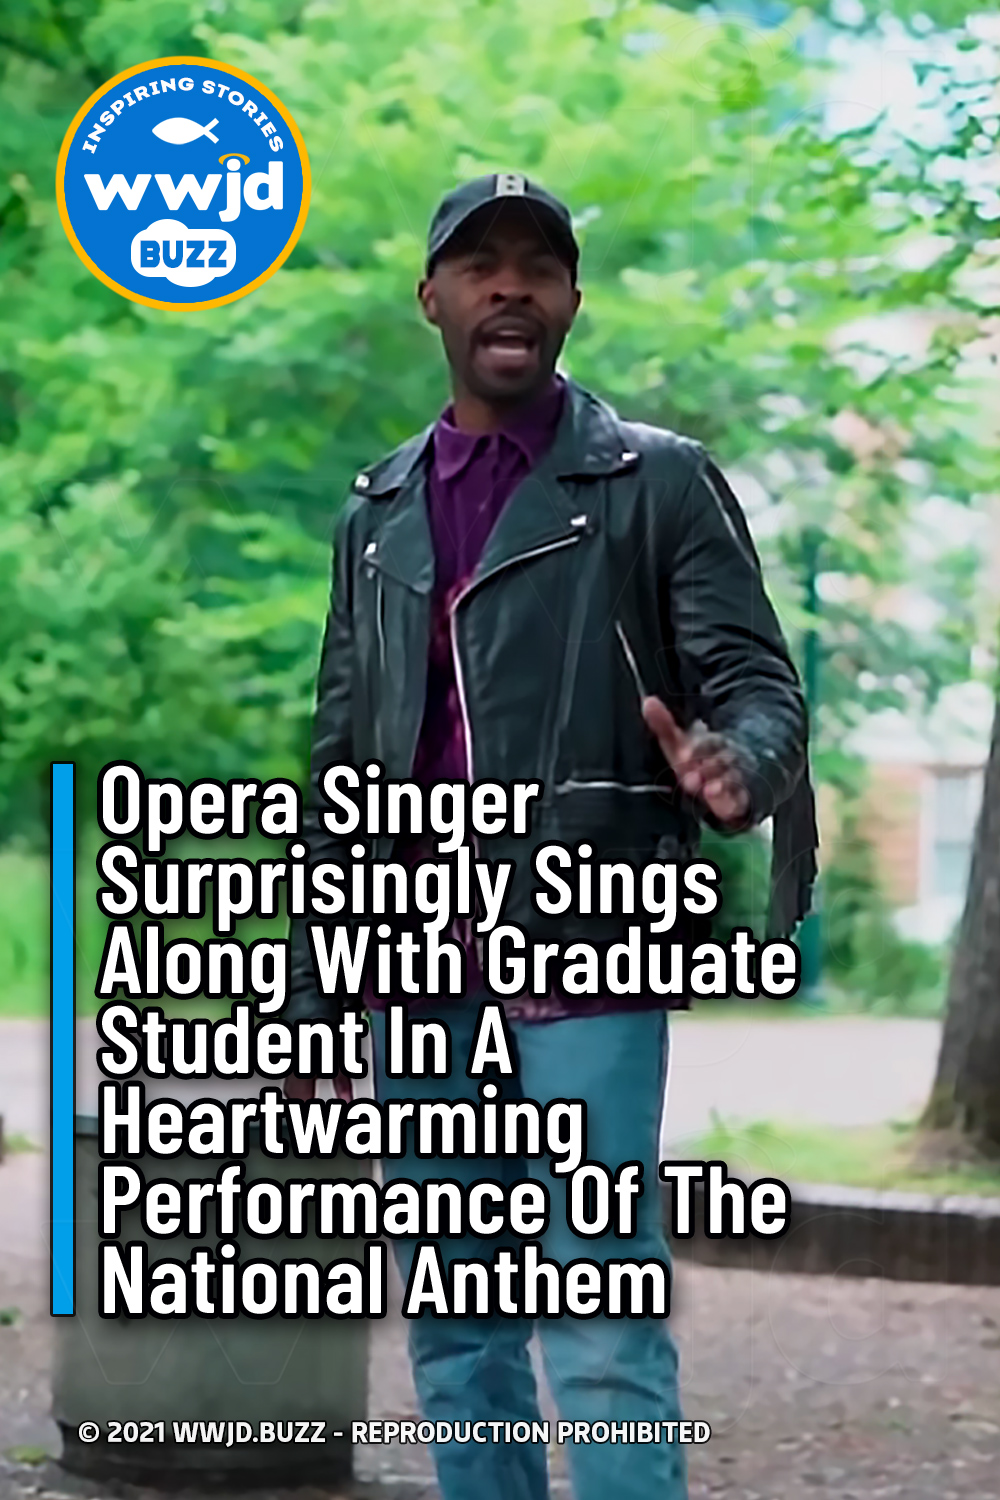 Opera Singer Surprisingly Sings Along With Graduate Student In A Heartwarming Performance Of The National Anthem